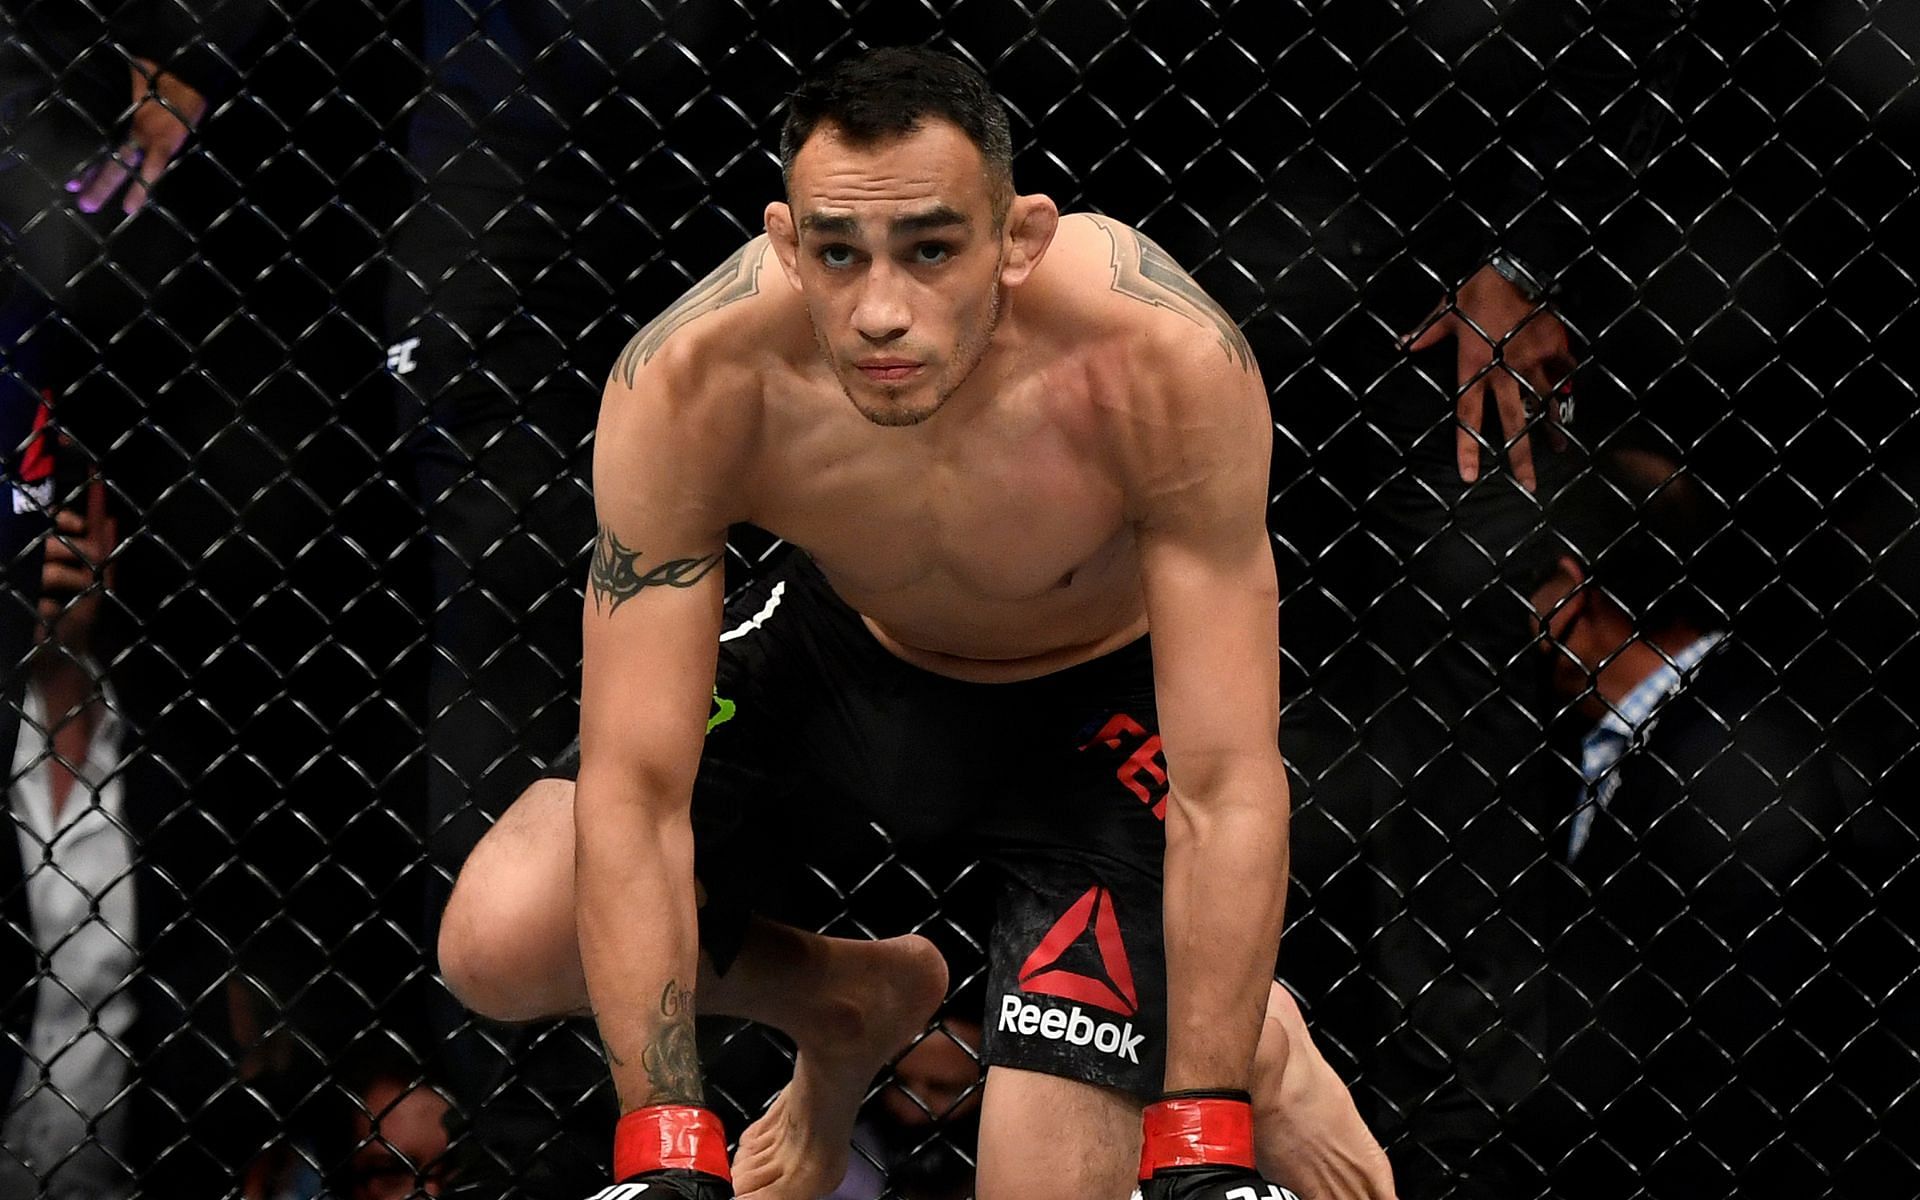 Tony Ferguson is regarded as one the most innovative MMA fighters